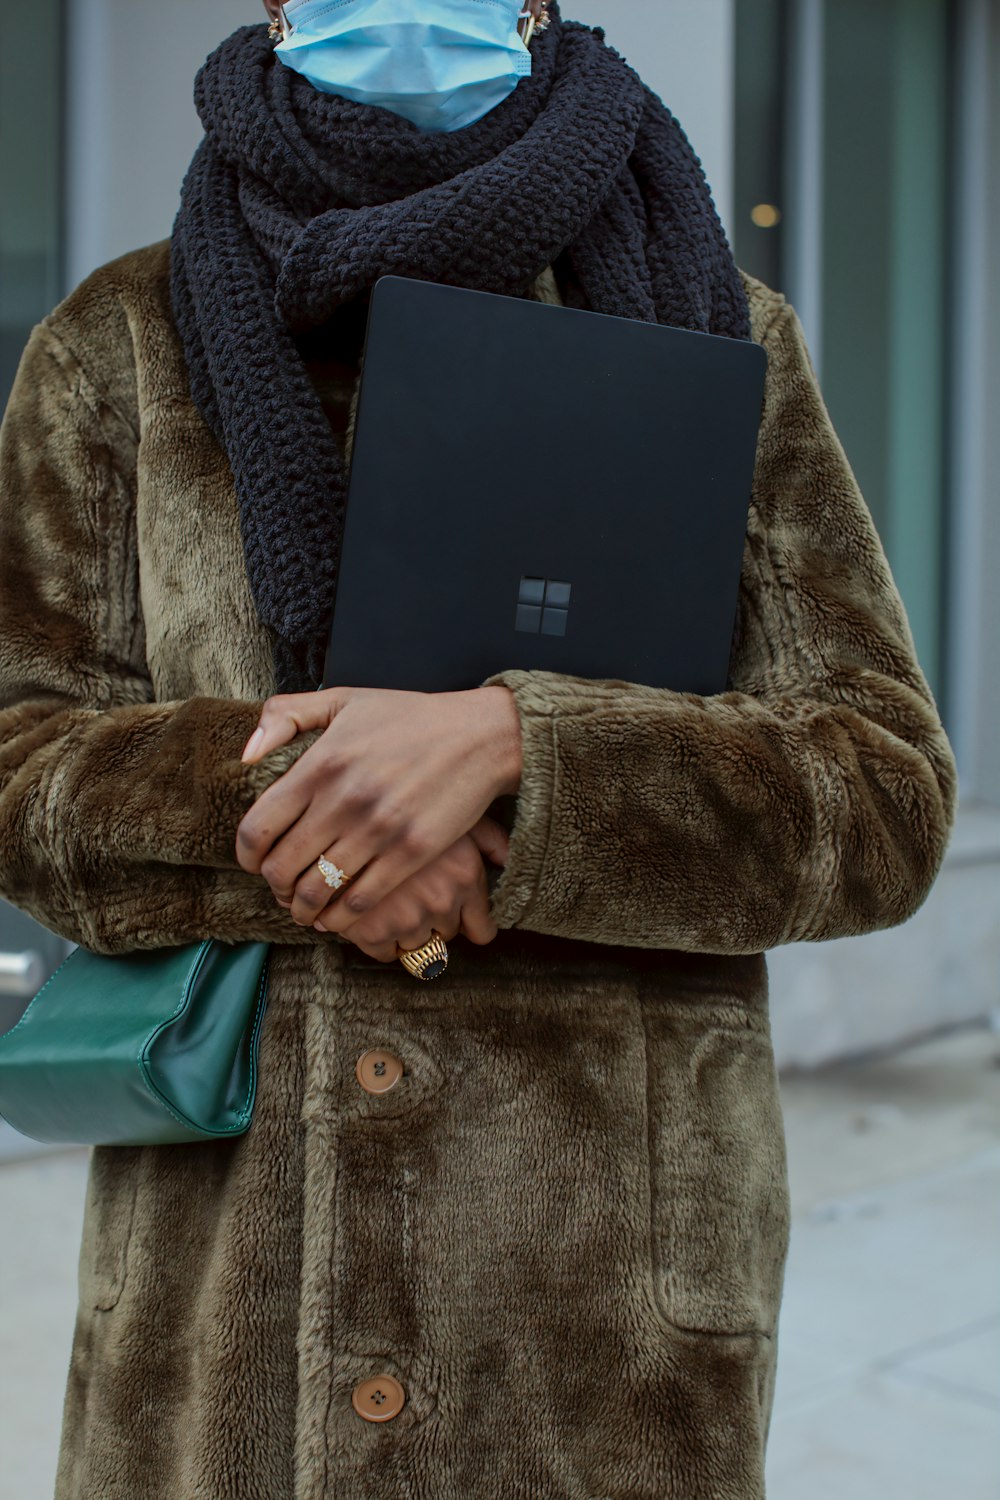 person holding black Surface device